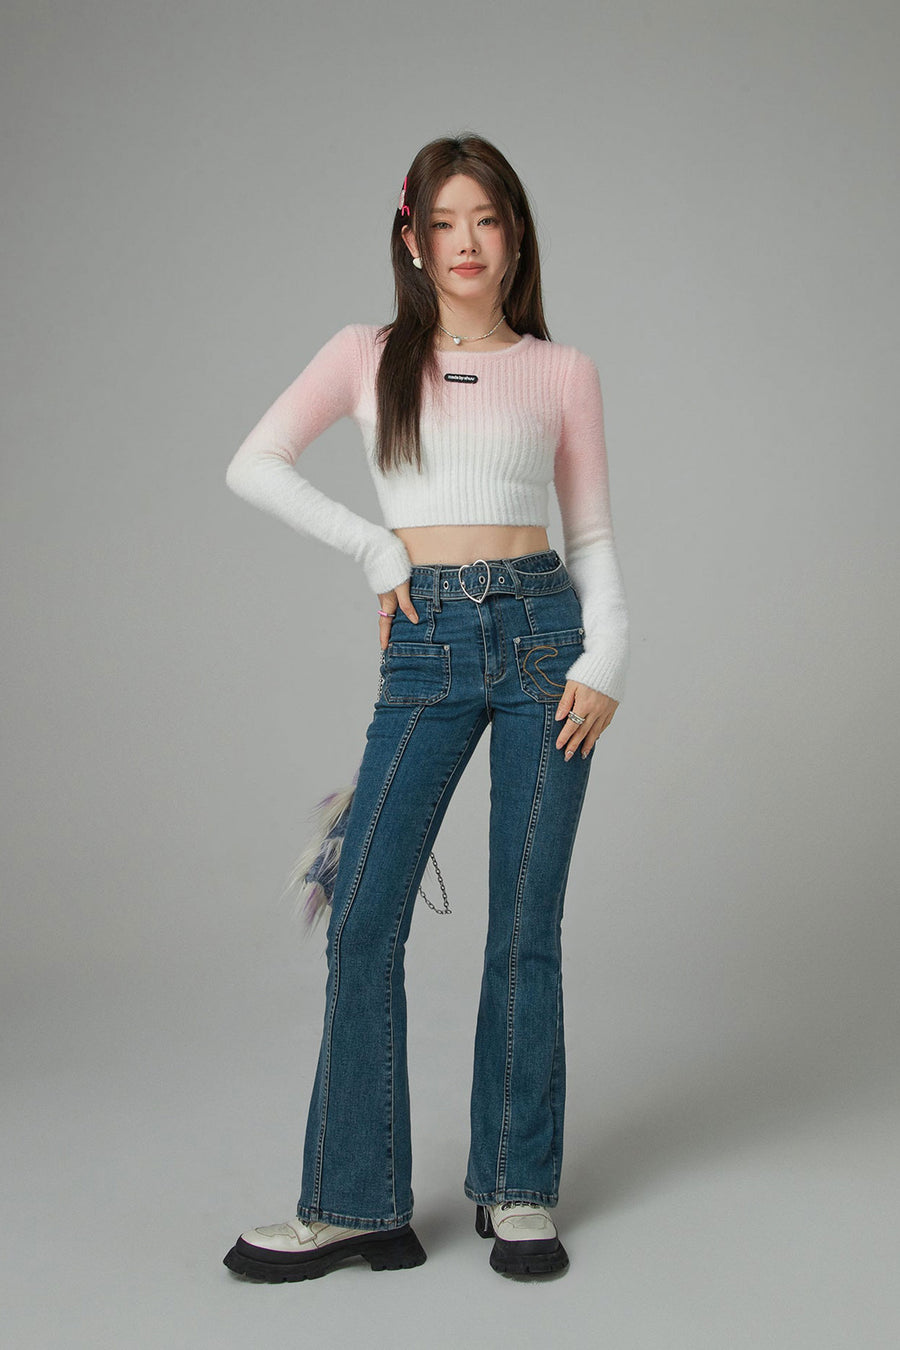 CHUU In A Song Gradient Crop Knit Sweater